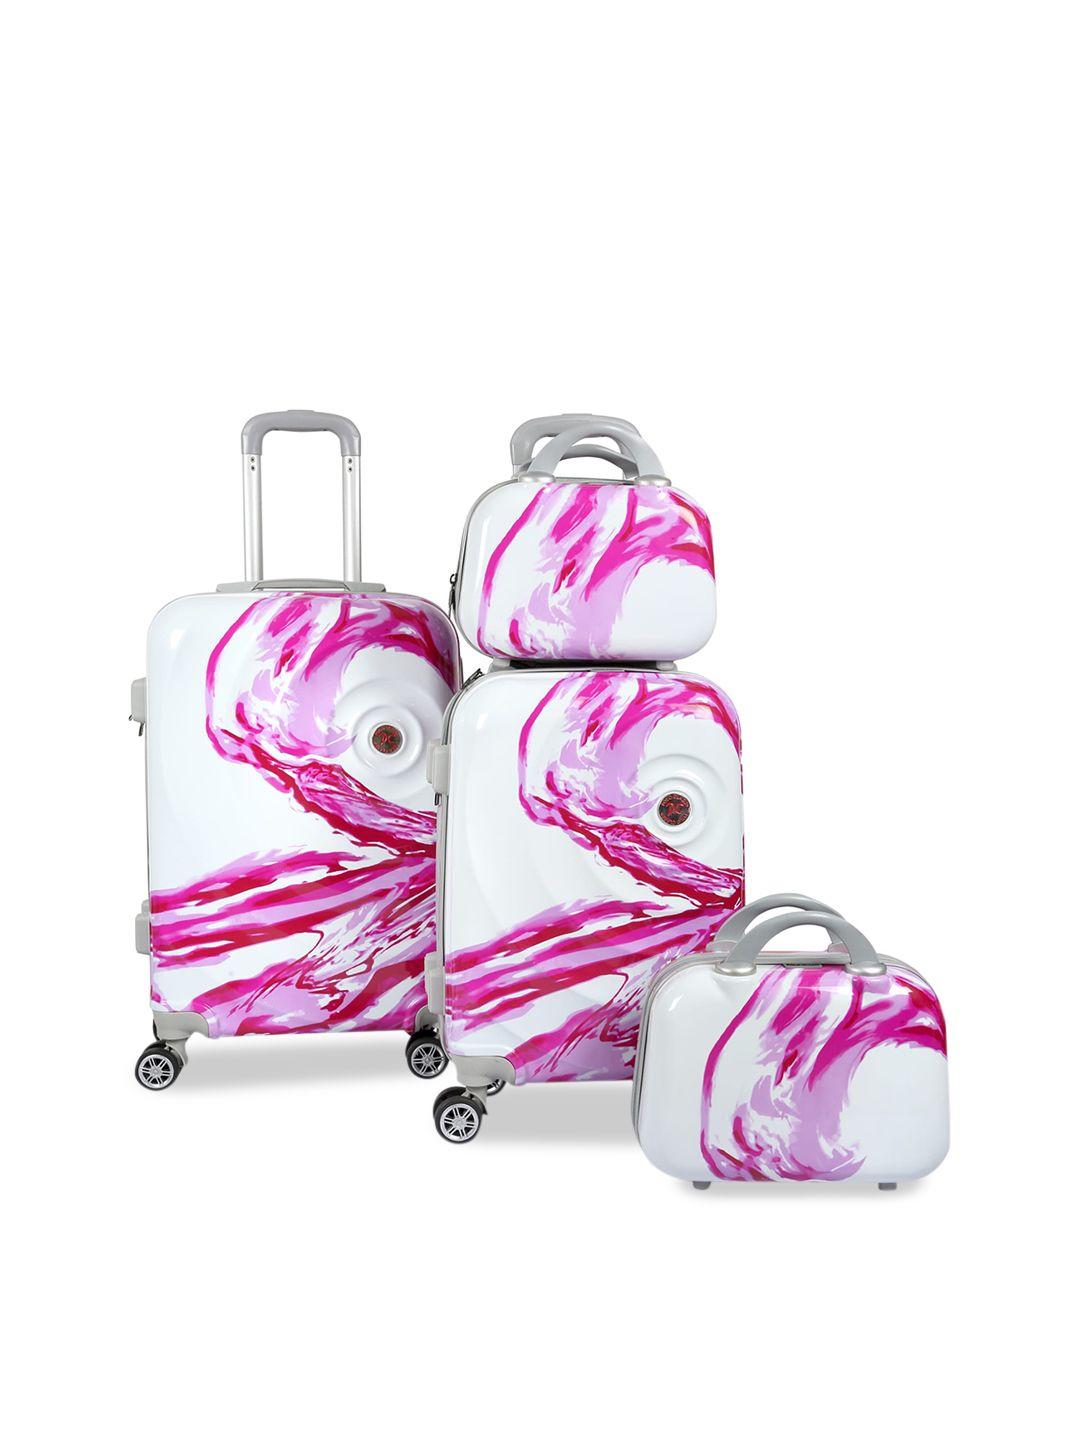 polo class unisex set of 4 pink & white printed trolley & vanity bags